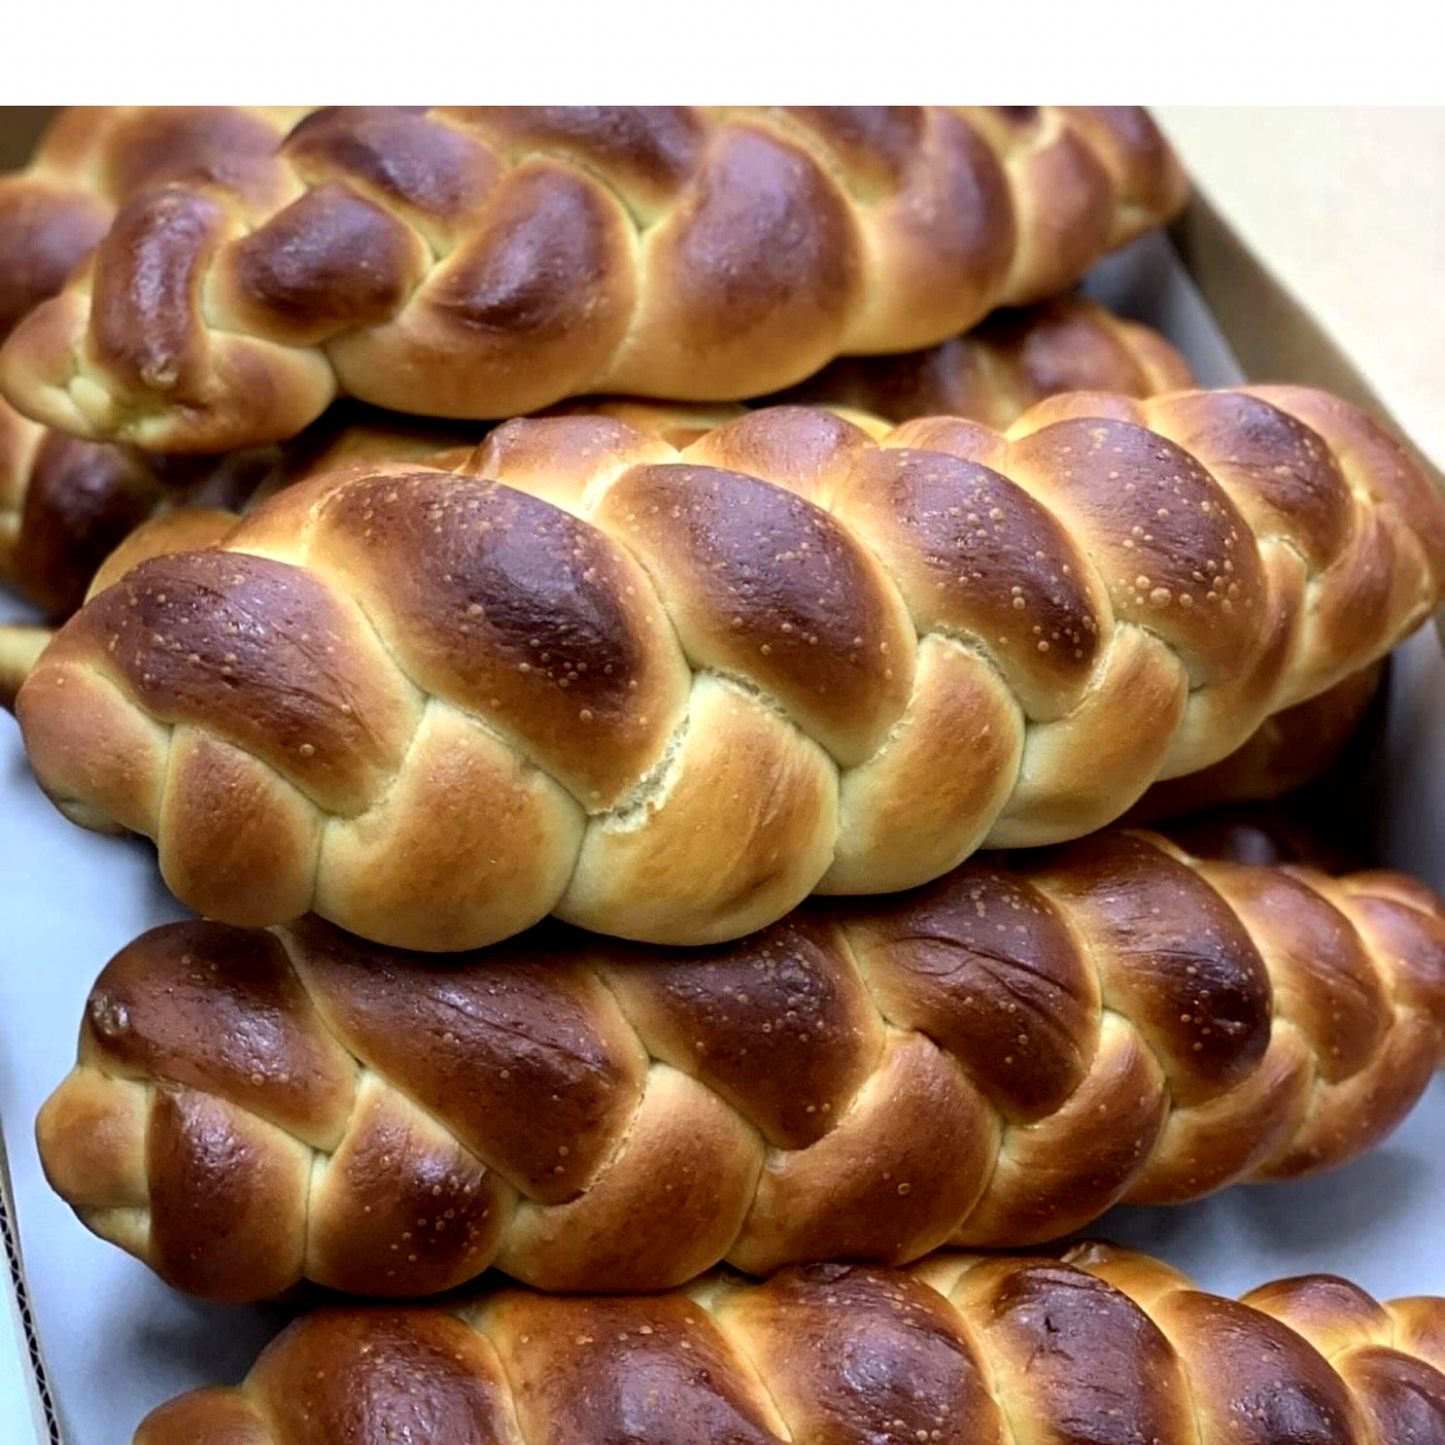 Fresh challah - Friday only